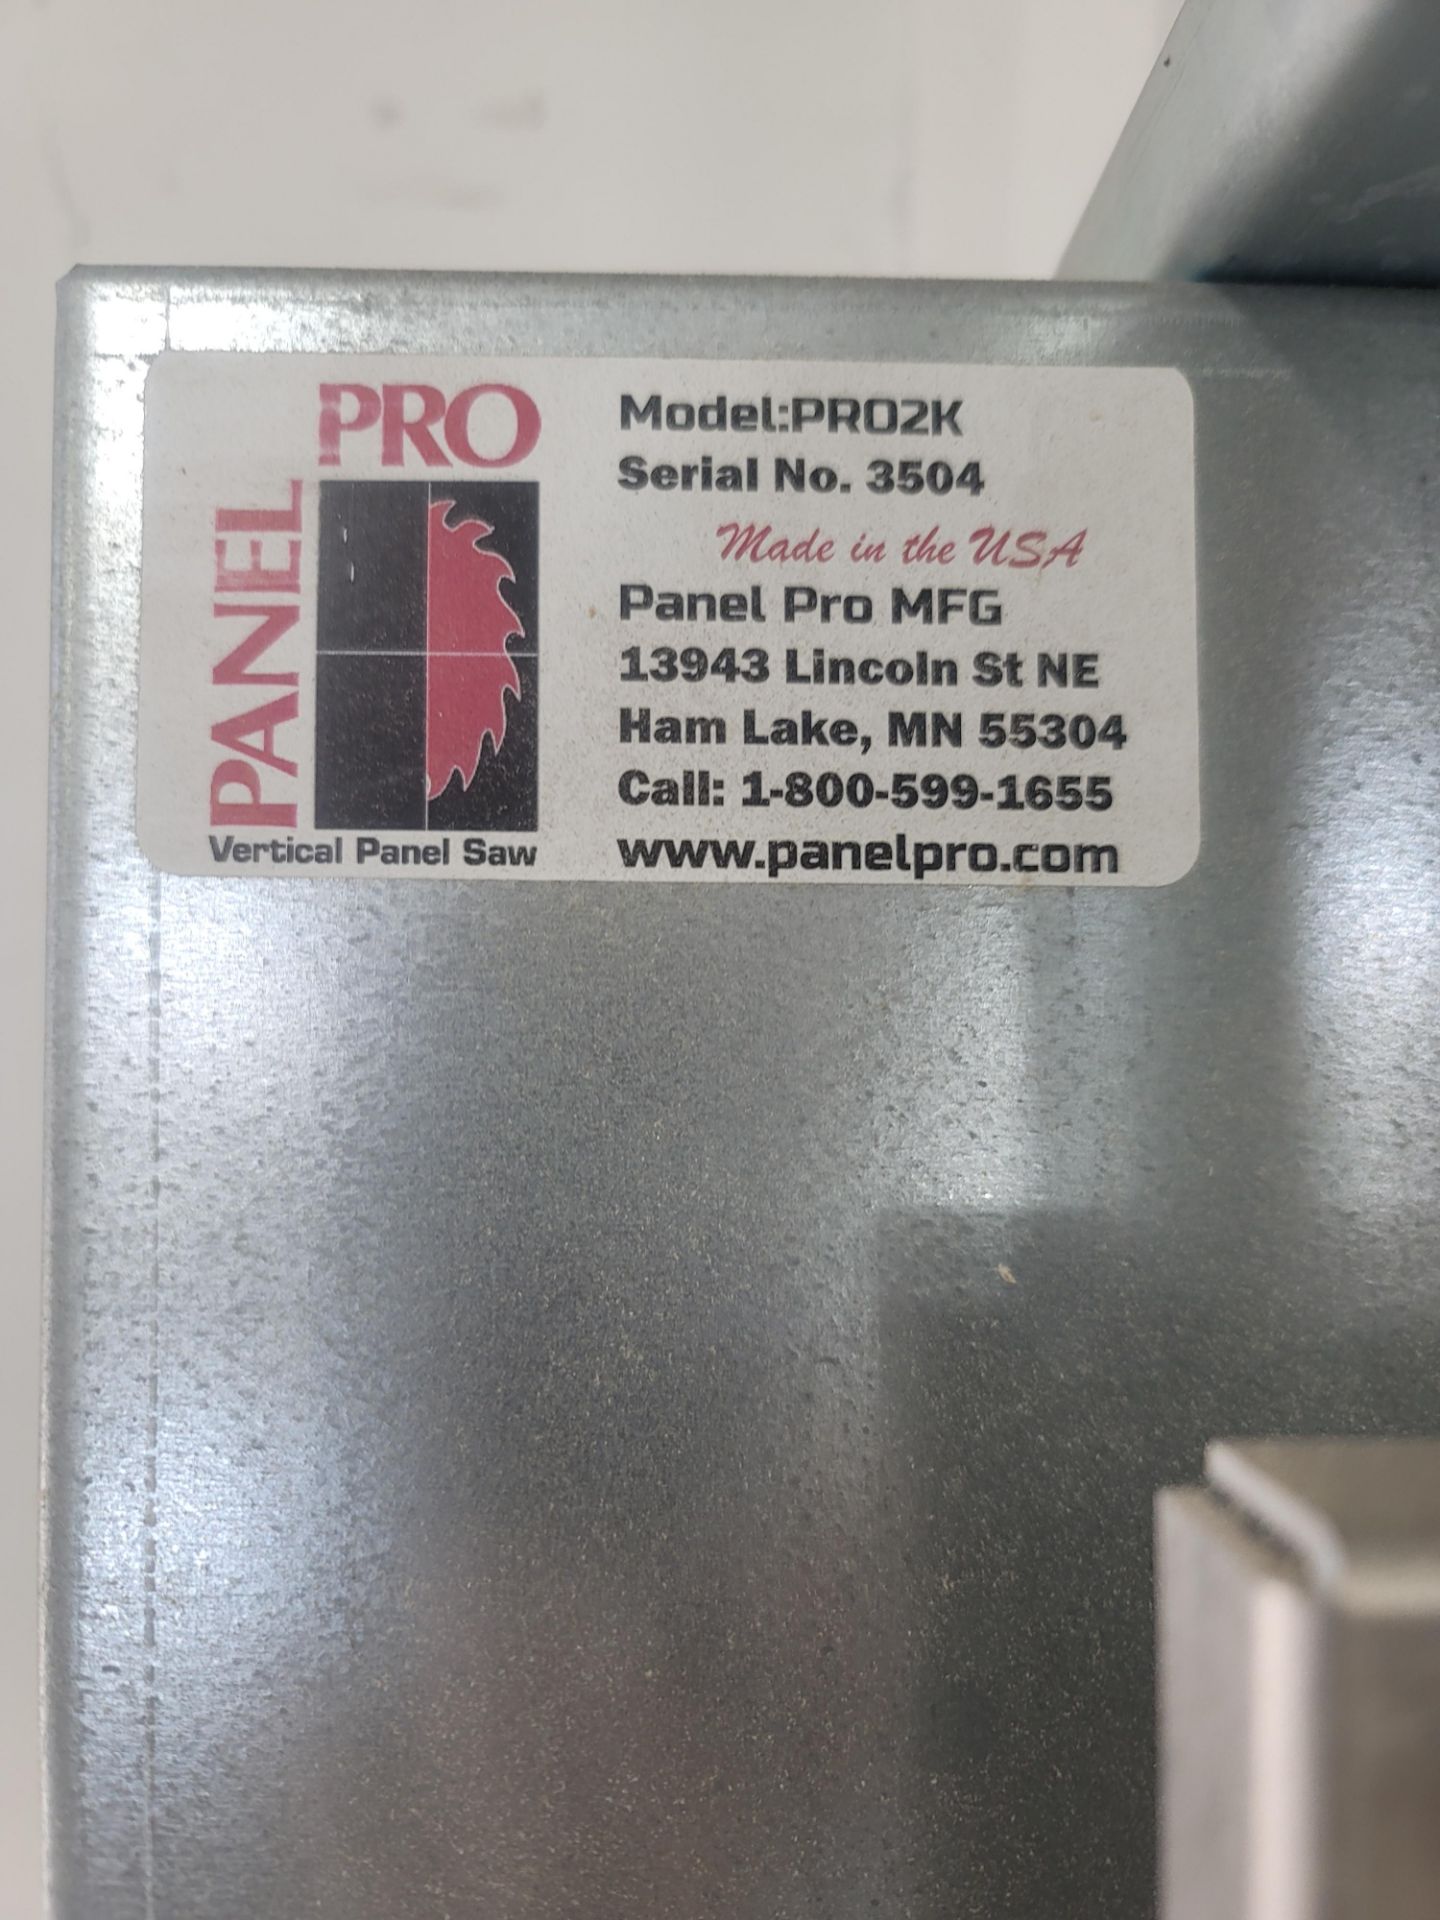 PANEL PRO VERTICAL PANEL SAW, MODEL PRO2K, W/ OWNER'S MANUAL AND OPERATING INSTRUCTIONS, S/N 3504 - Image 3 of 3